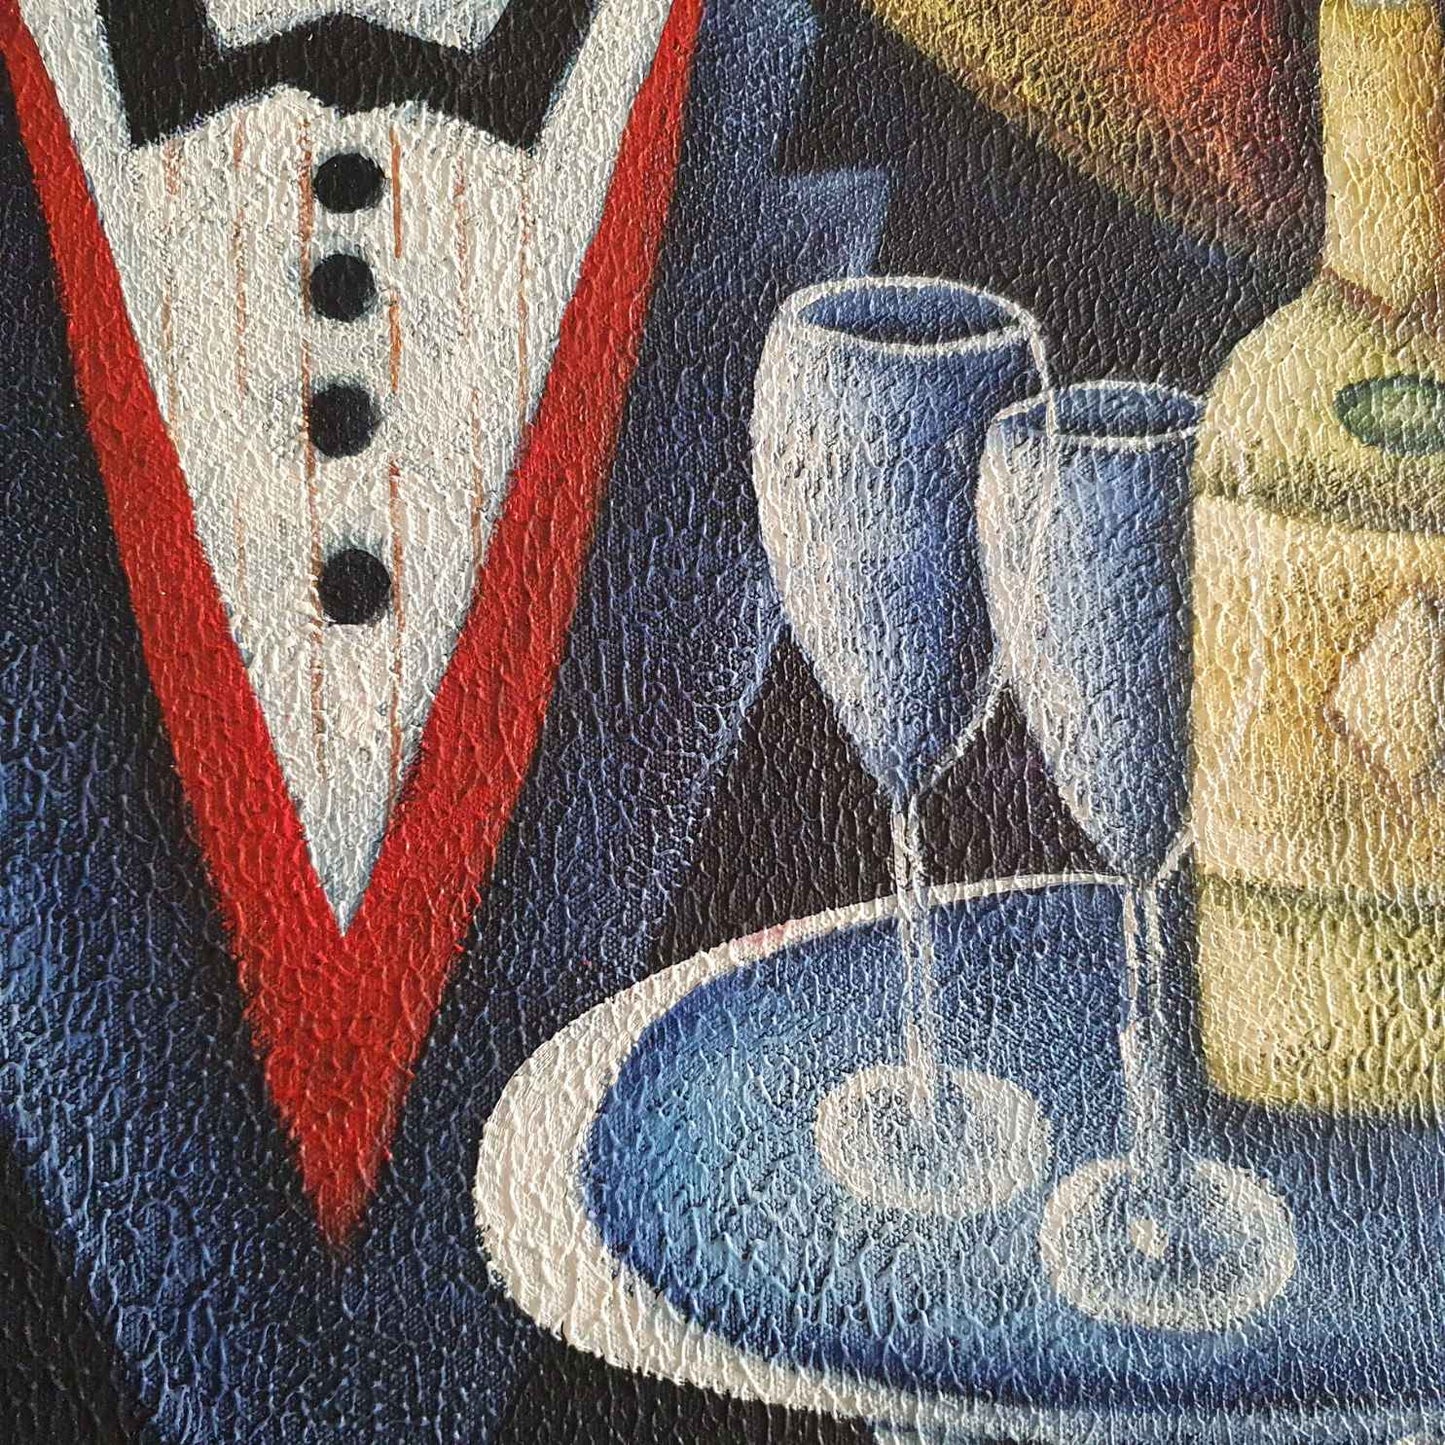 Hospitality Triptych Painting 50x60 cm [3 pieces]